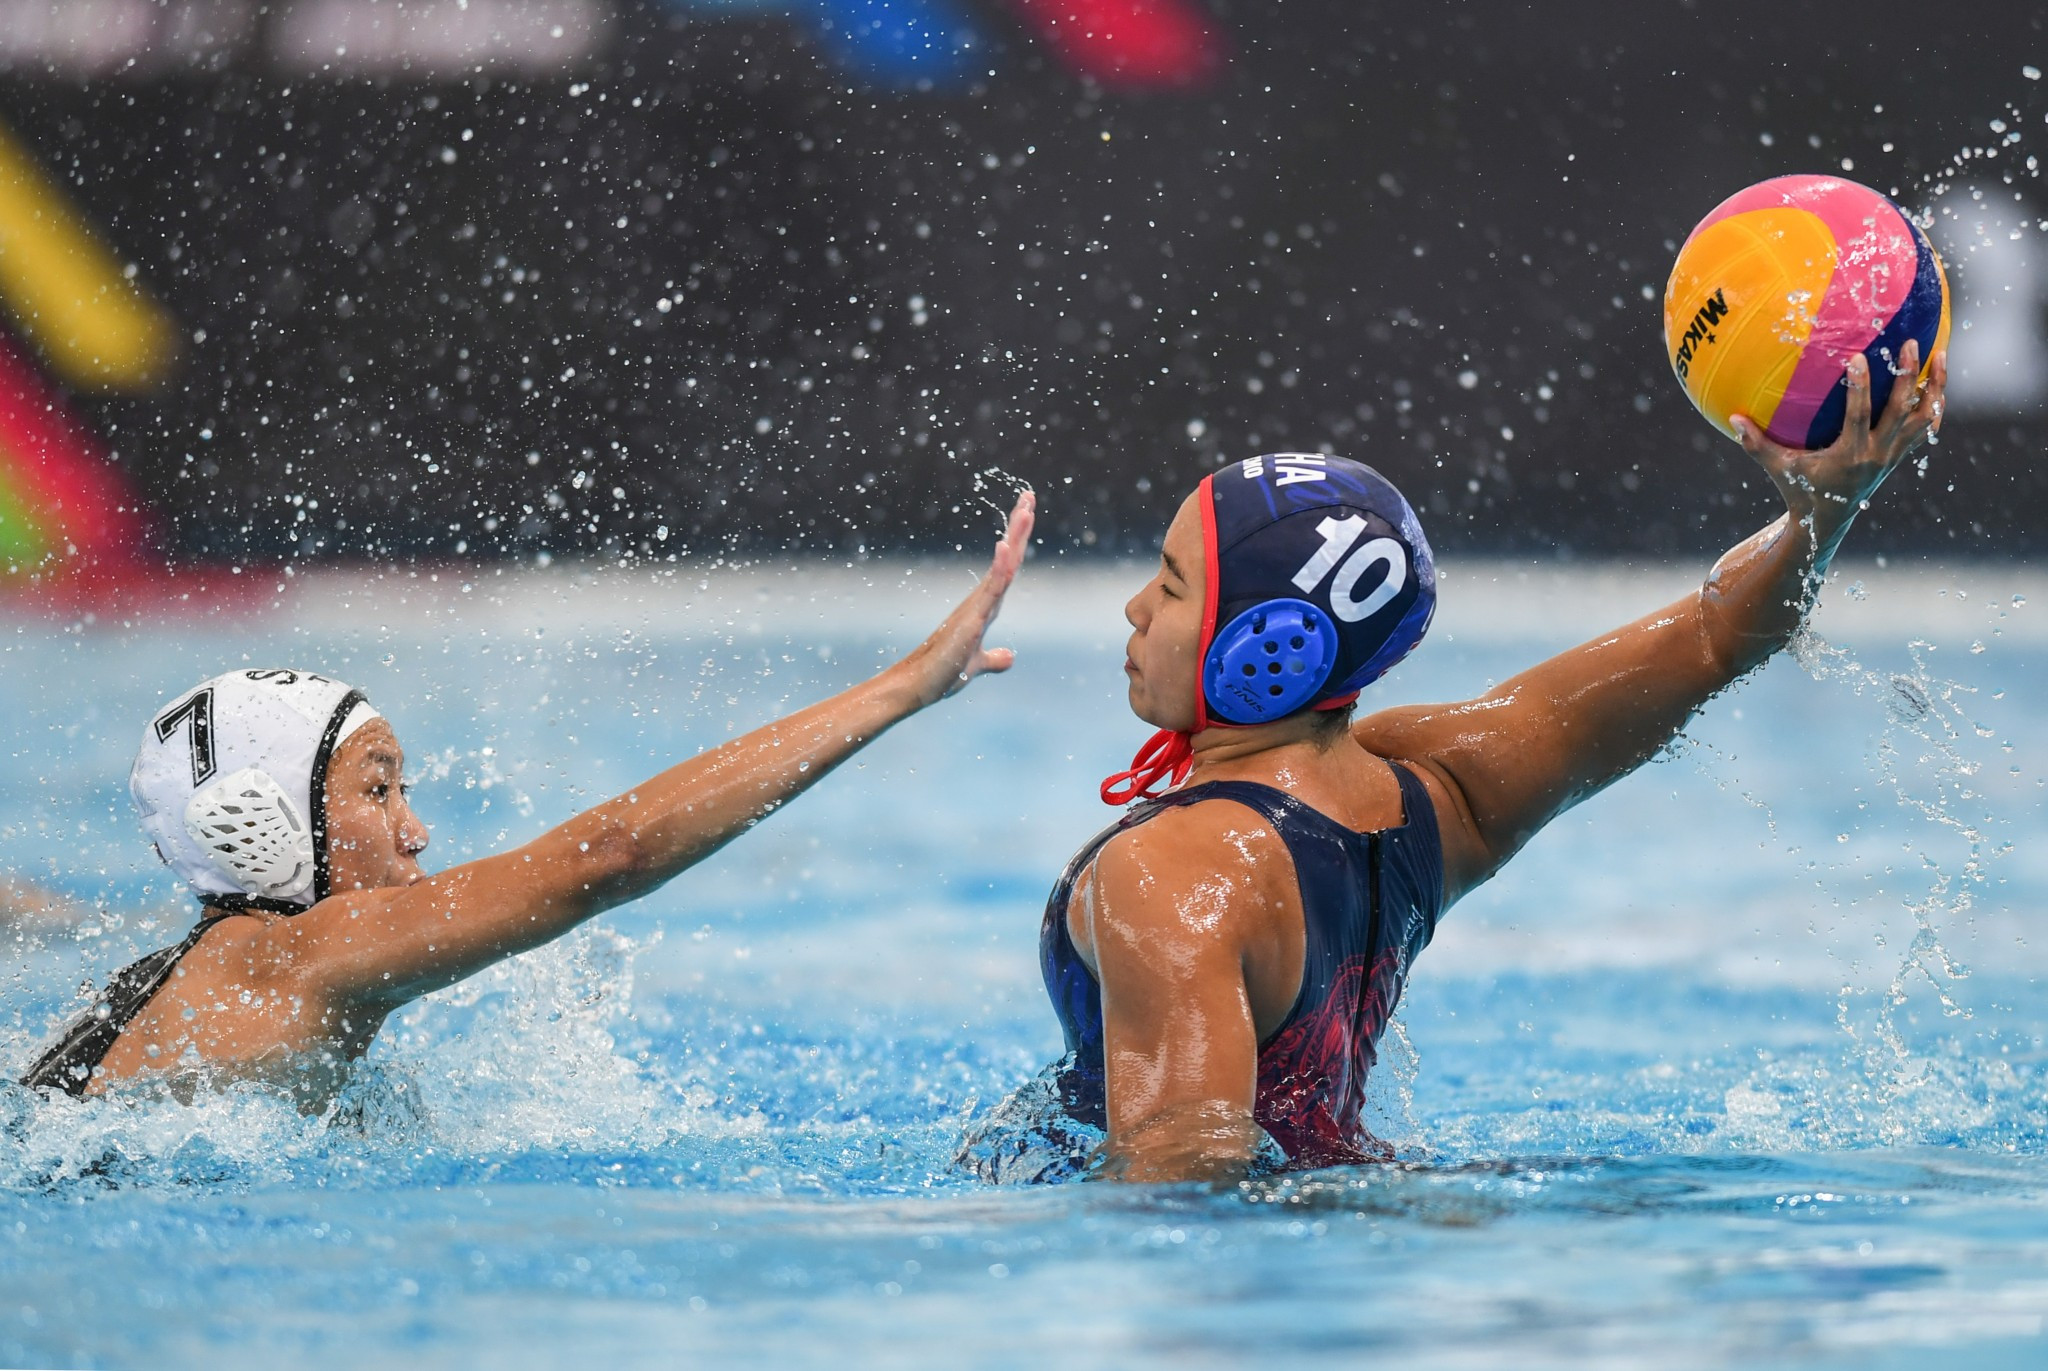 Thailand clinched the gold medal in the women's water polo tournament ©Getty Images